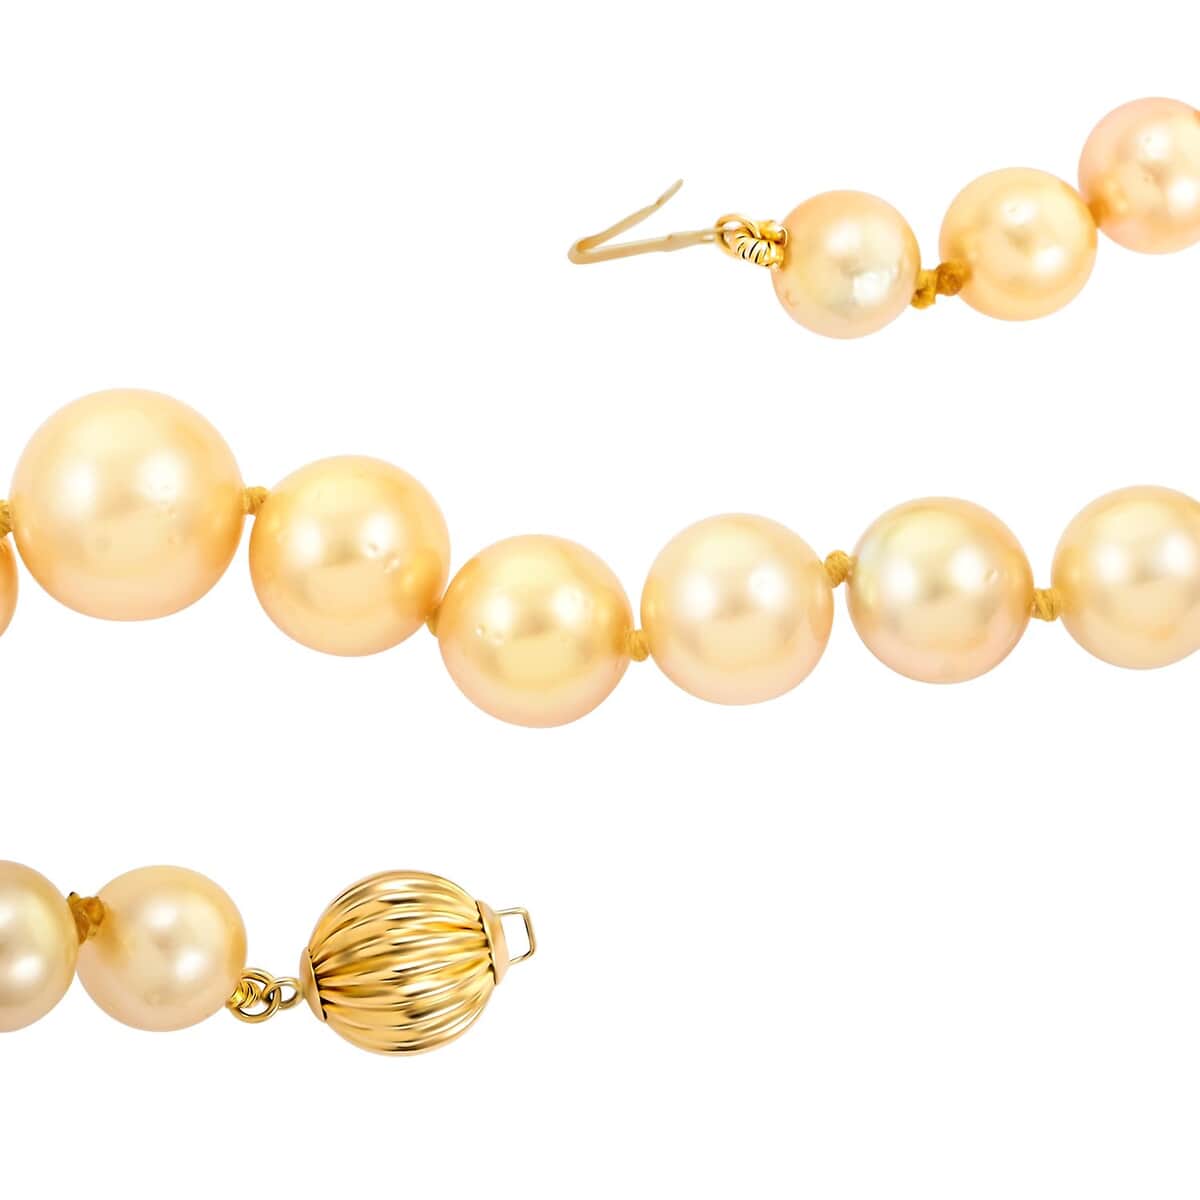 Iliana Certified & Appraised AAAA South Sea Golden Pearl 8-10mm Graduation Necklace in 18K Yellow Gold (18 Inches), Pearl Jewelry for Women, Anniversary Necklace for Wife image number 3